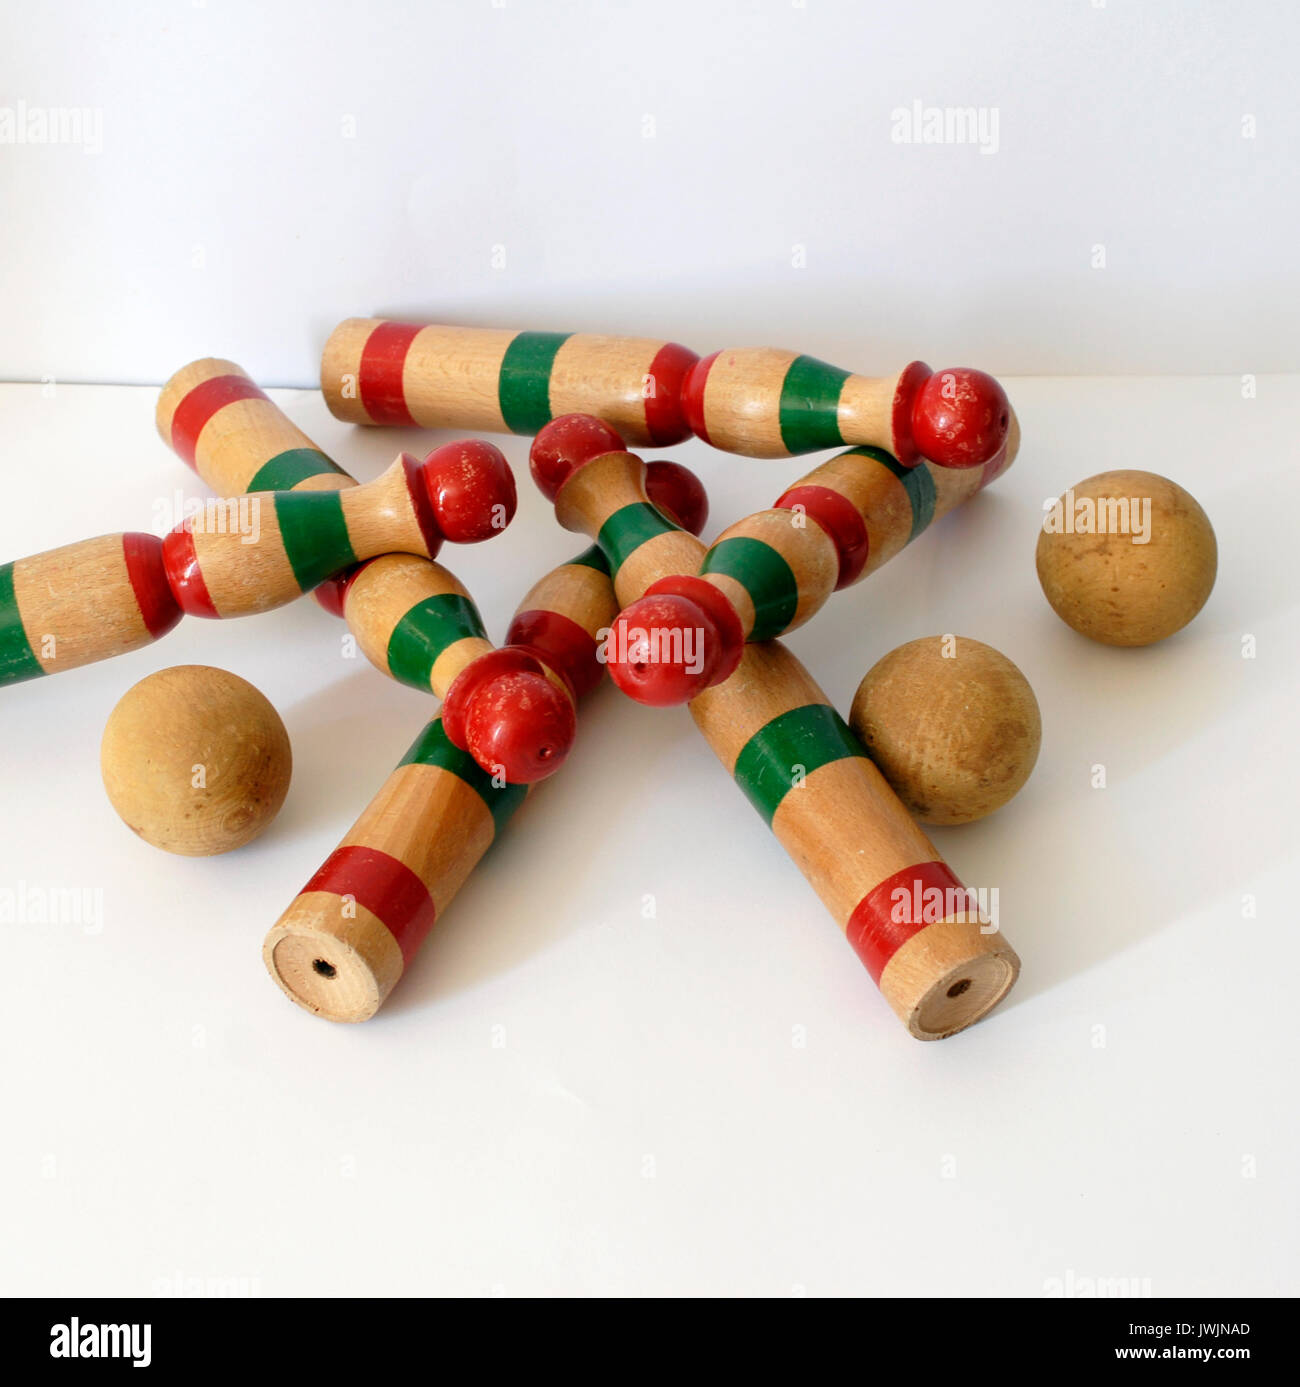 Vintage wooden bowling kit game, with balls. Made in Spain, with colors green and red Stock Photo